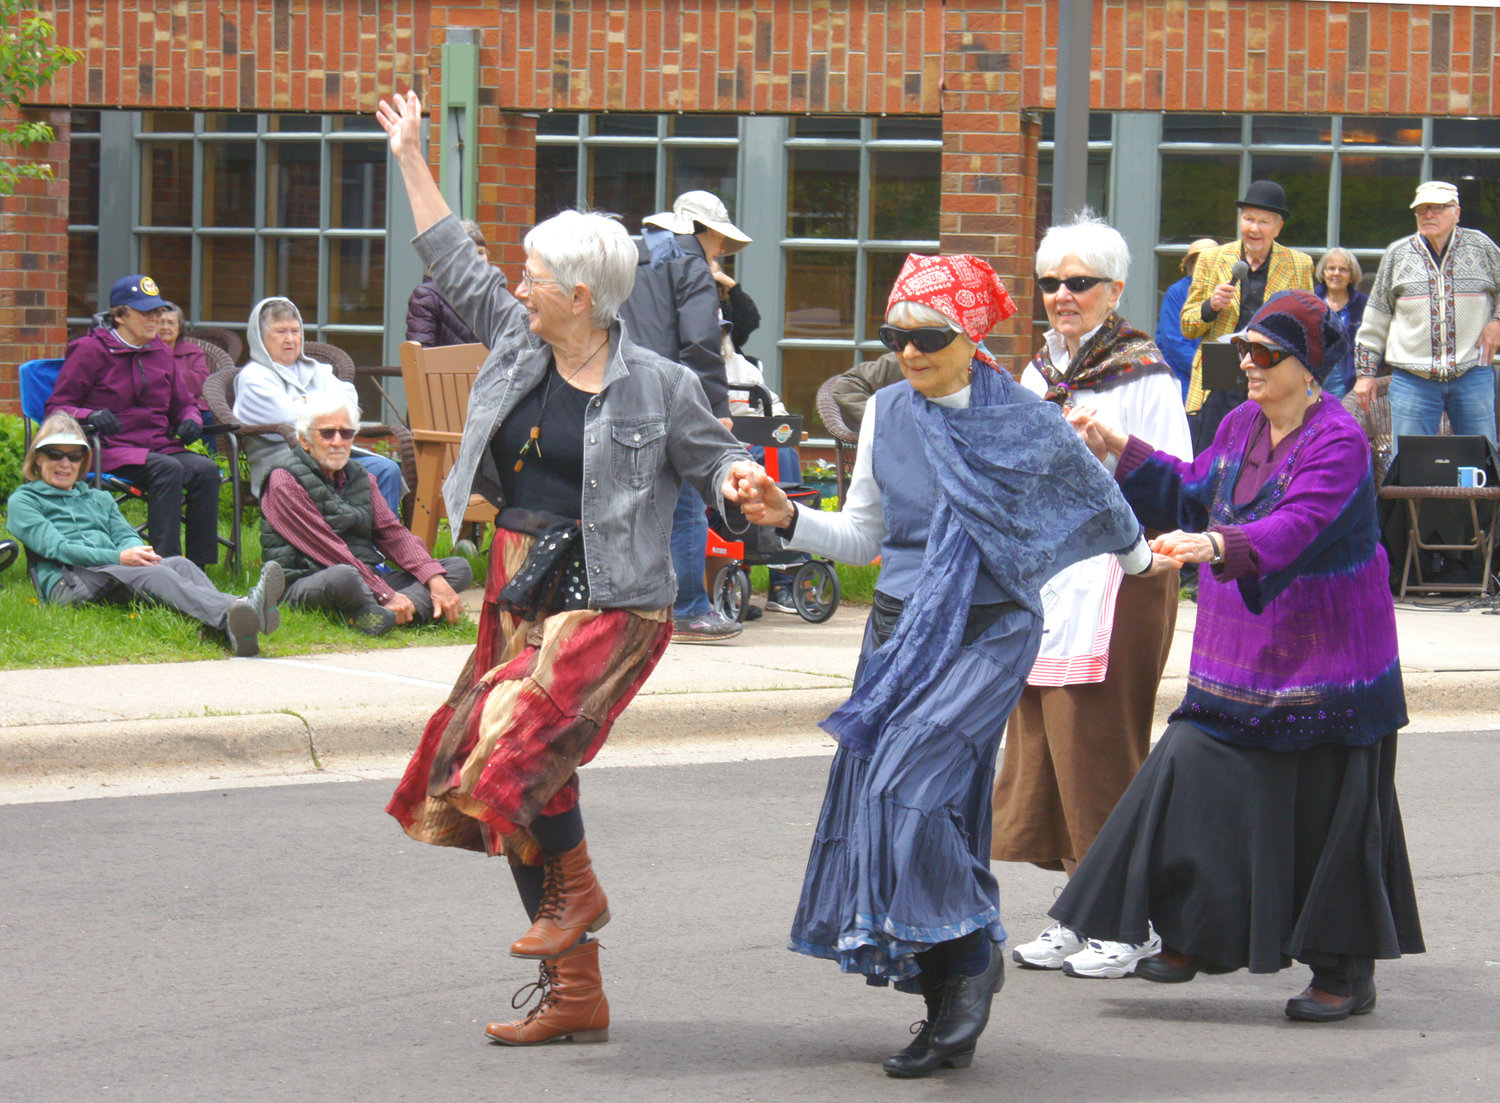 For no good reason, except to have fun, Becketwood staged a parade on Saturday, May 21.  The parade included a king, two queens, Schottische dancers and a marching kazoo band.